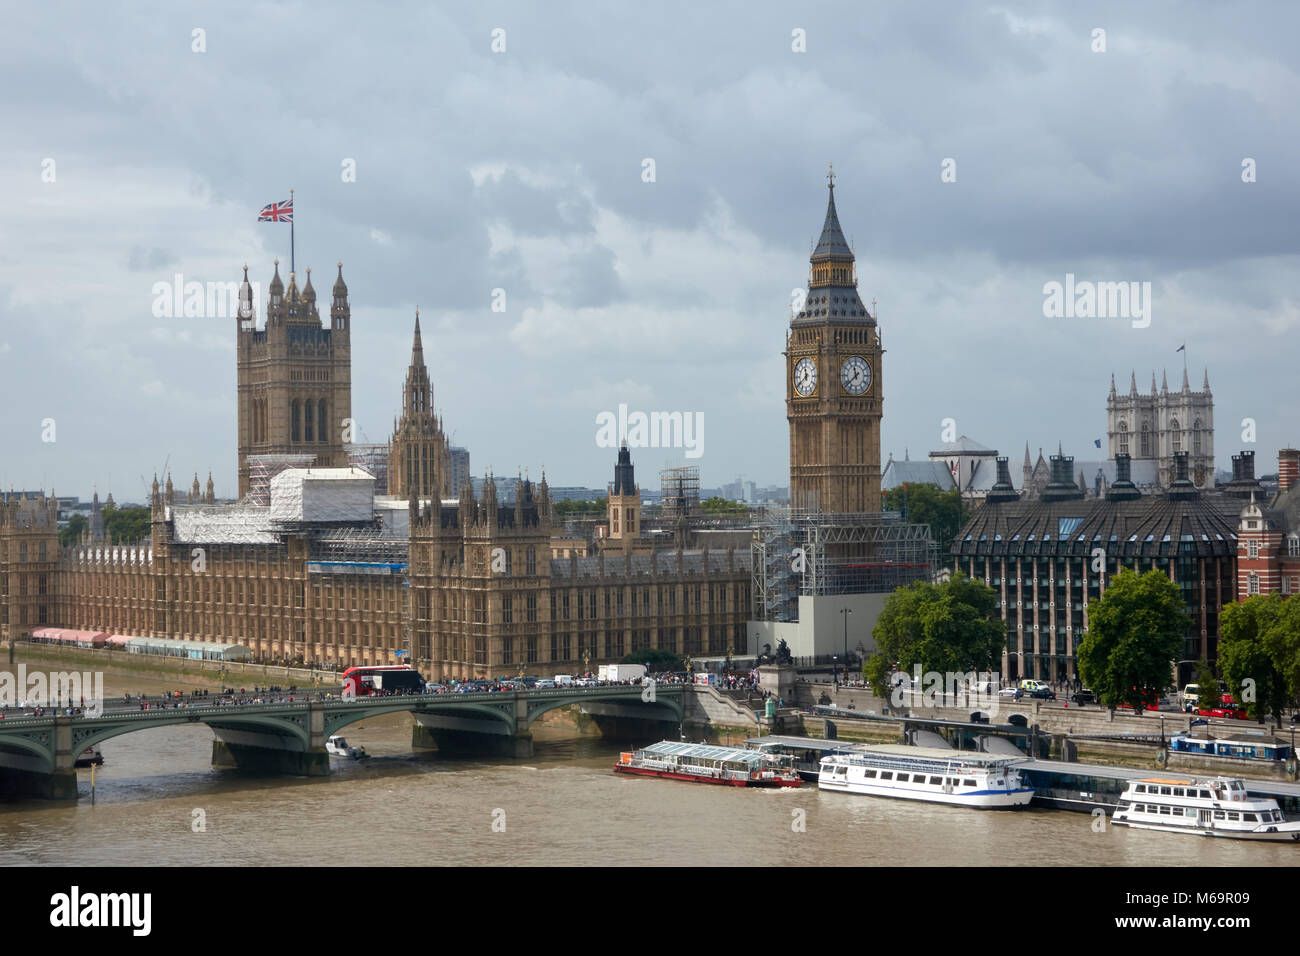 Reconstruction of Big Ben in London in 2017. Cloudy weather. Stock Photo